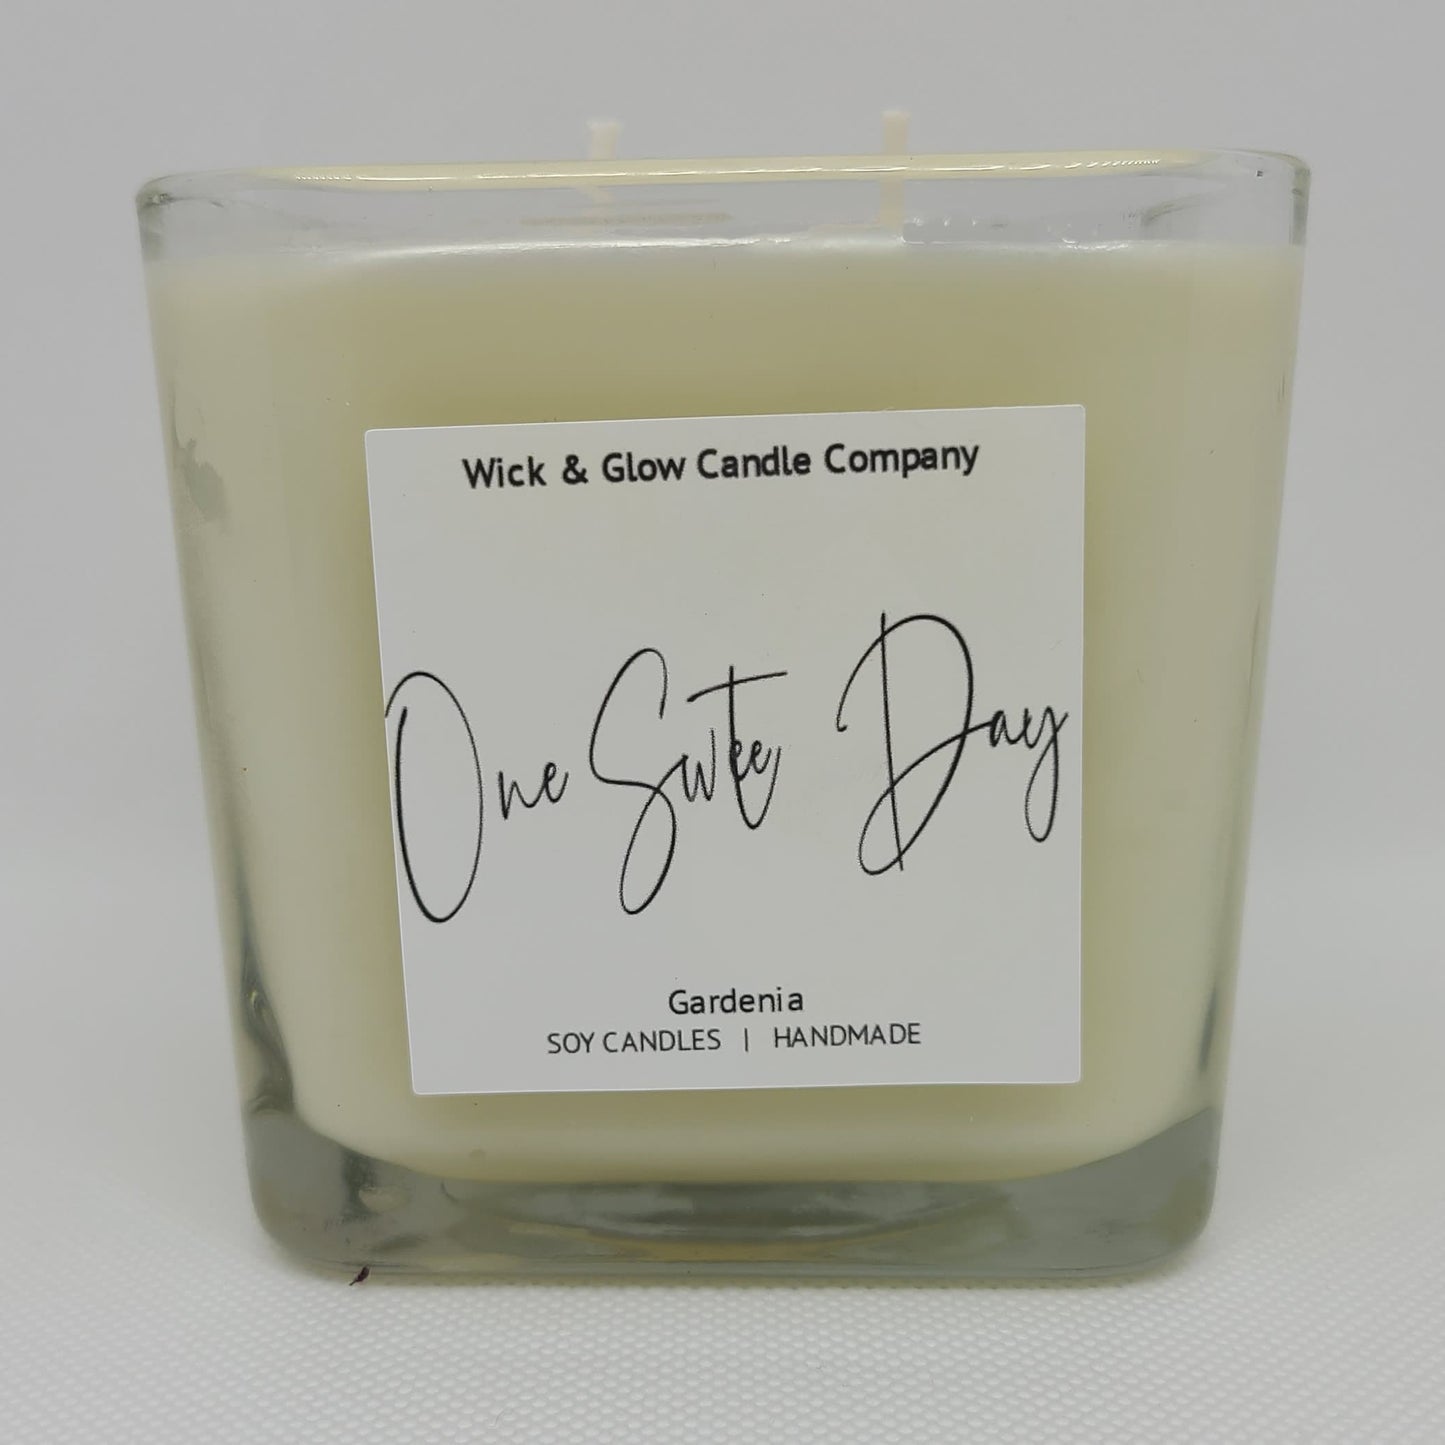 One Sweet Day -Gardenia Scented Luxury Candle - The Wick and Glow Candle Company